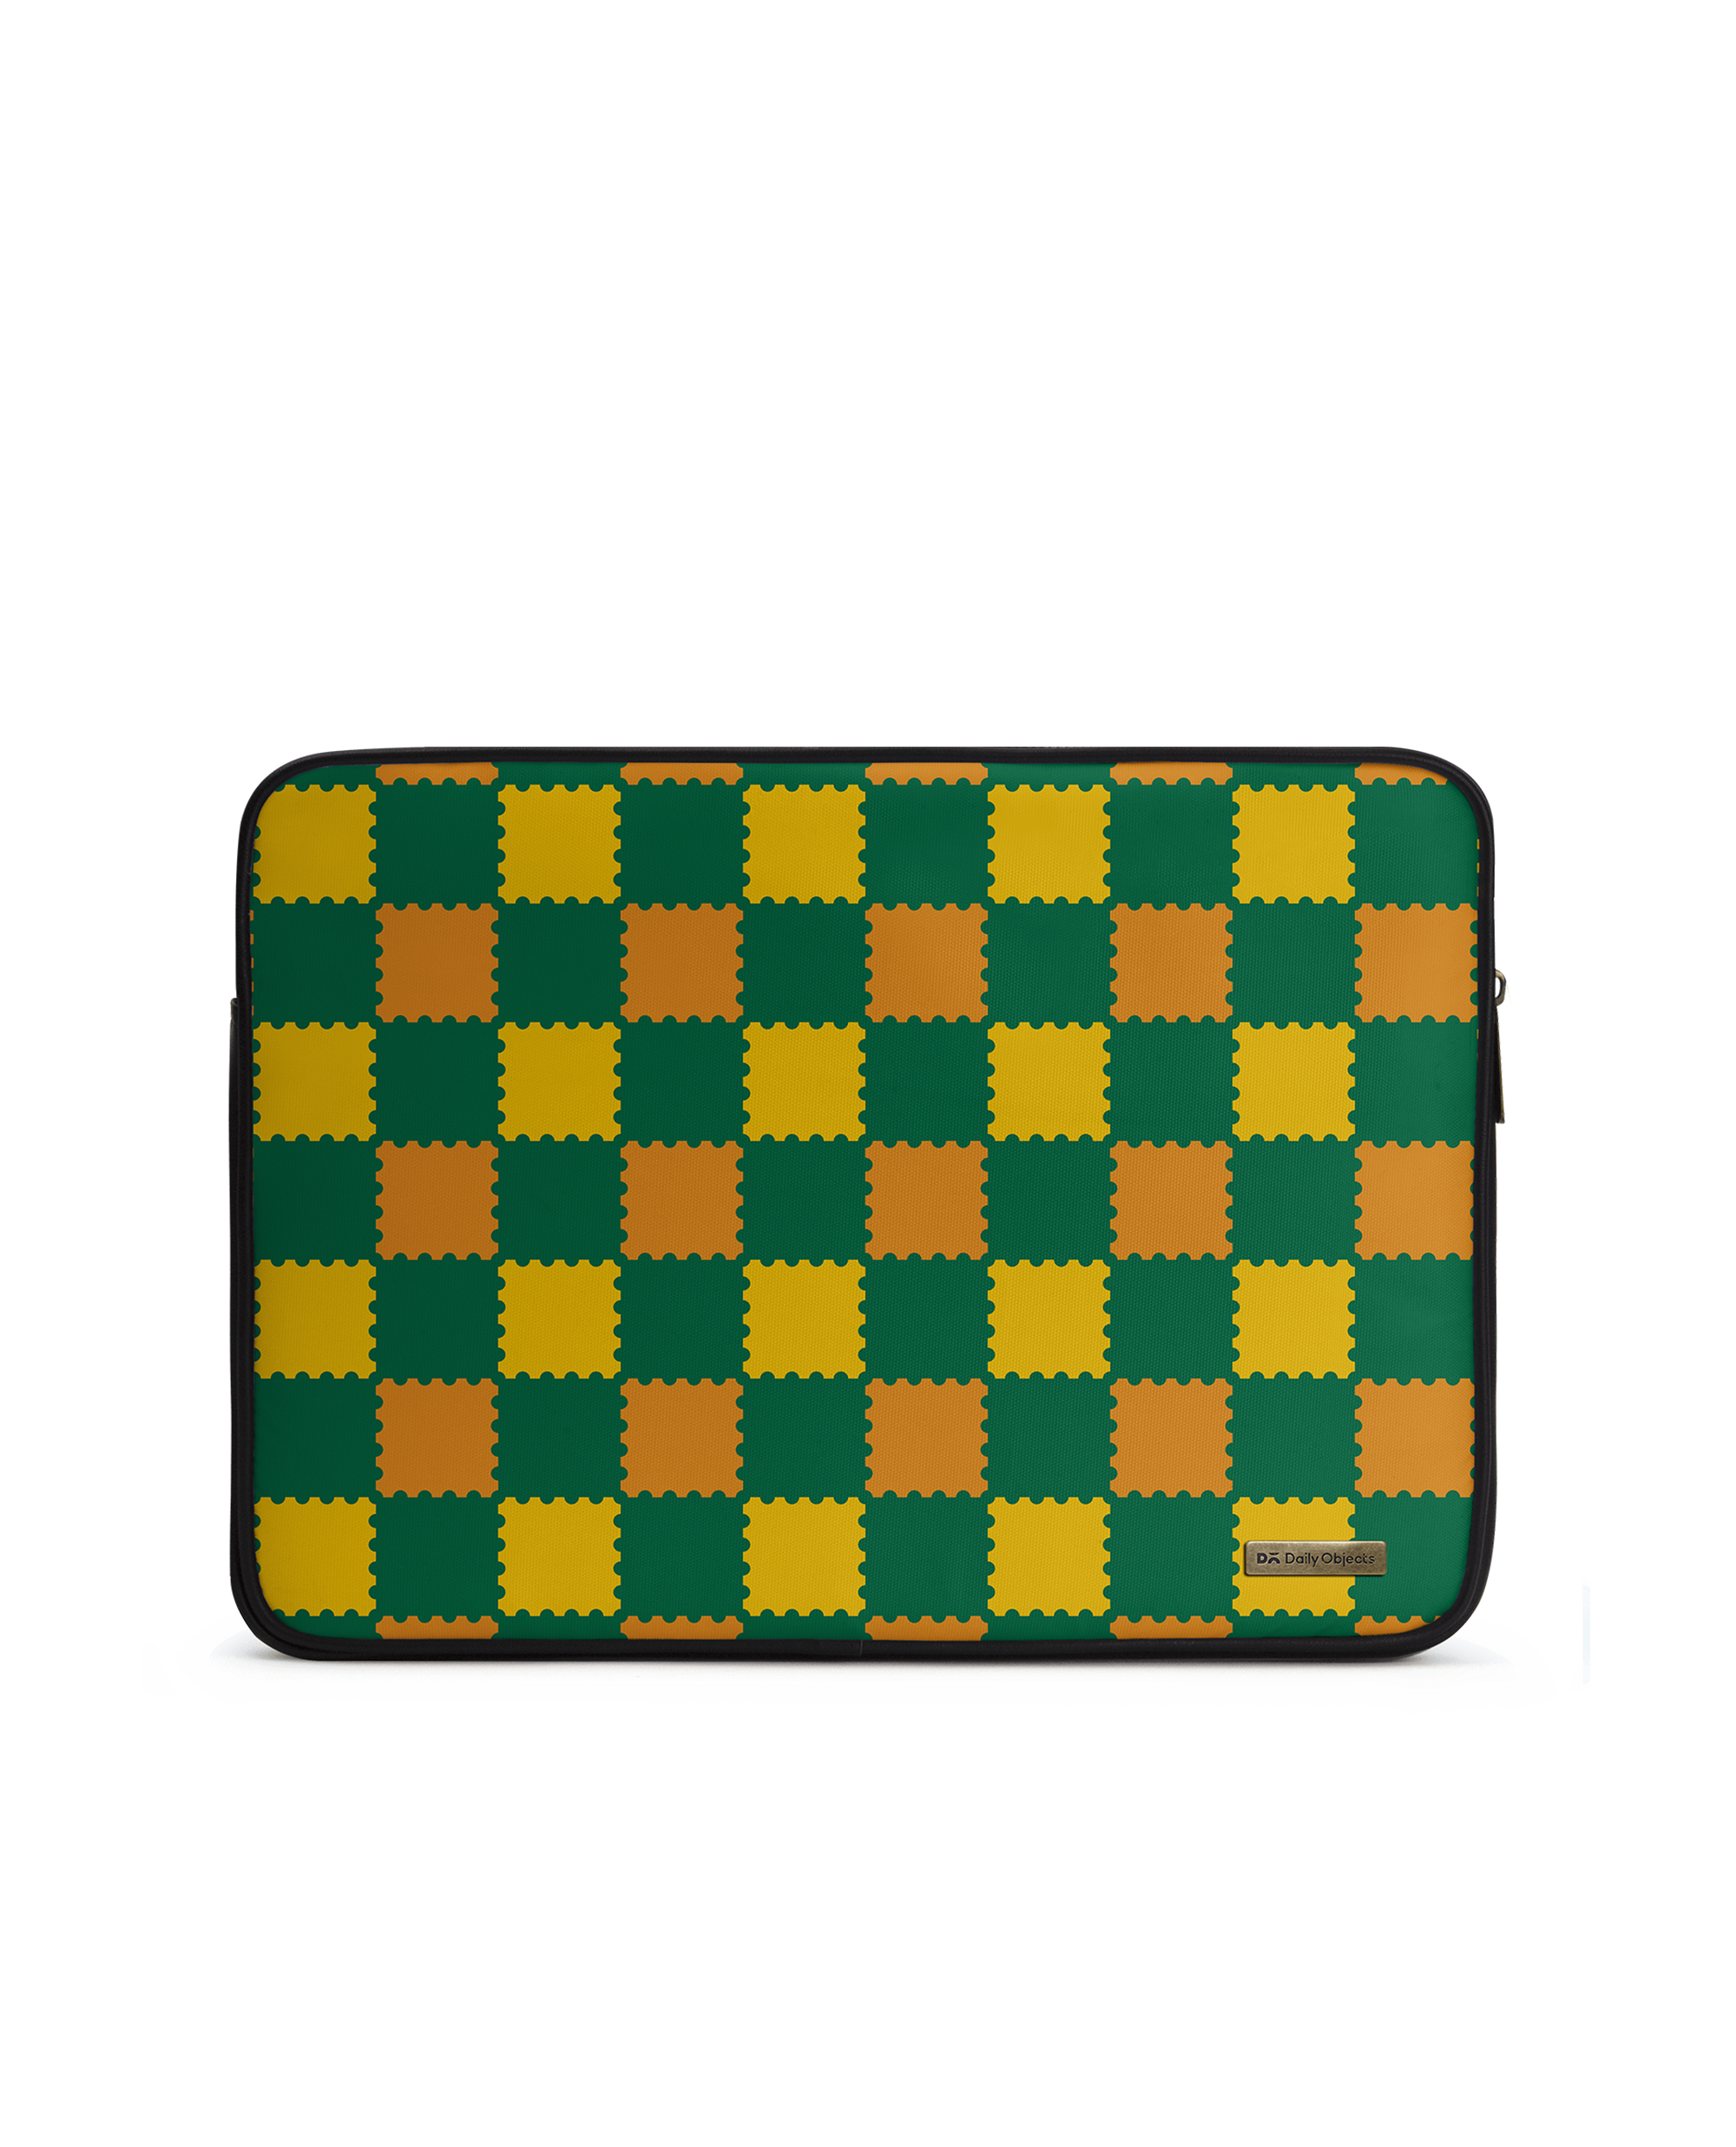 Louis Vuitton Bundle Svg with layered checkered pattern and